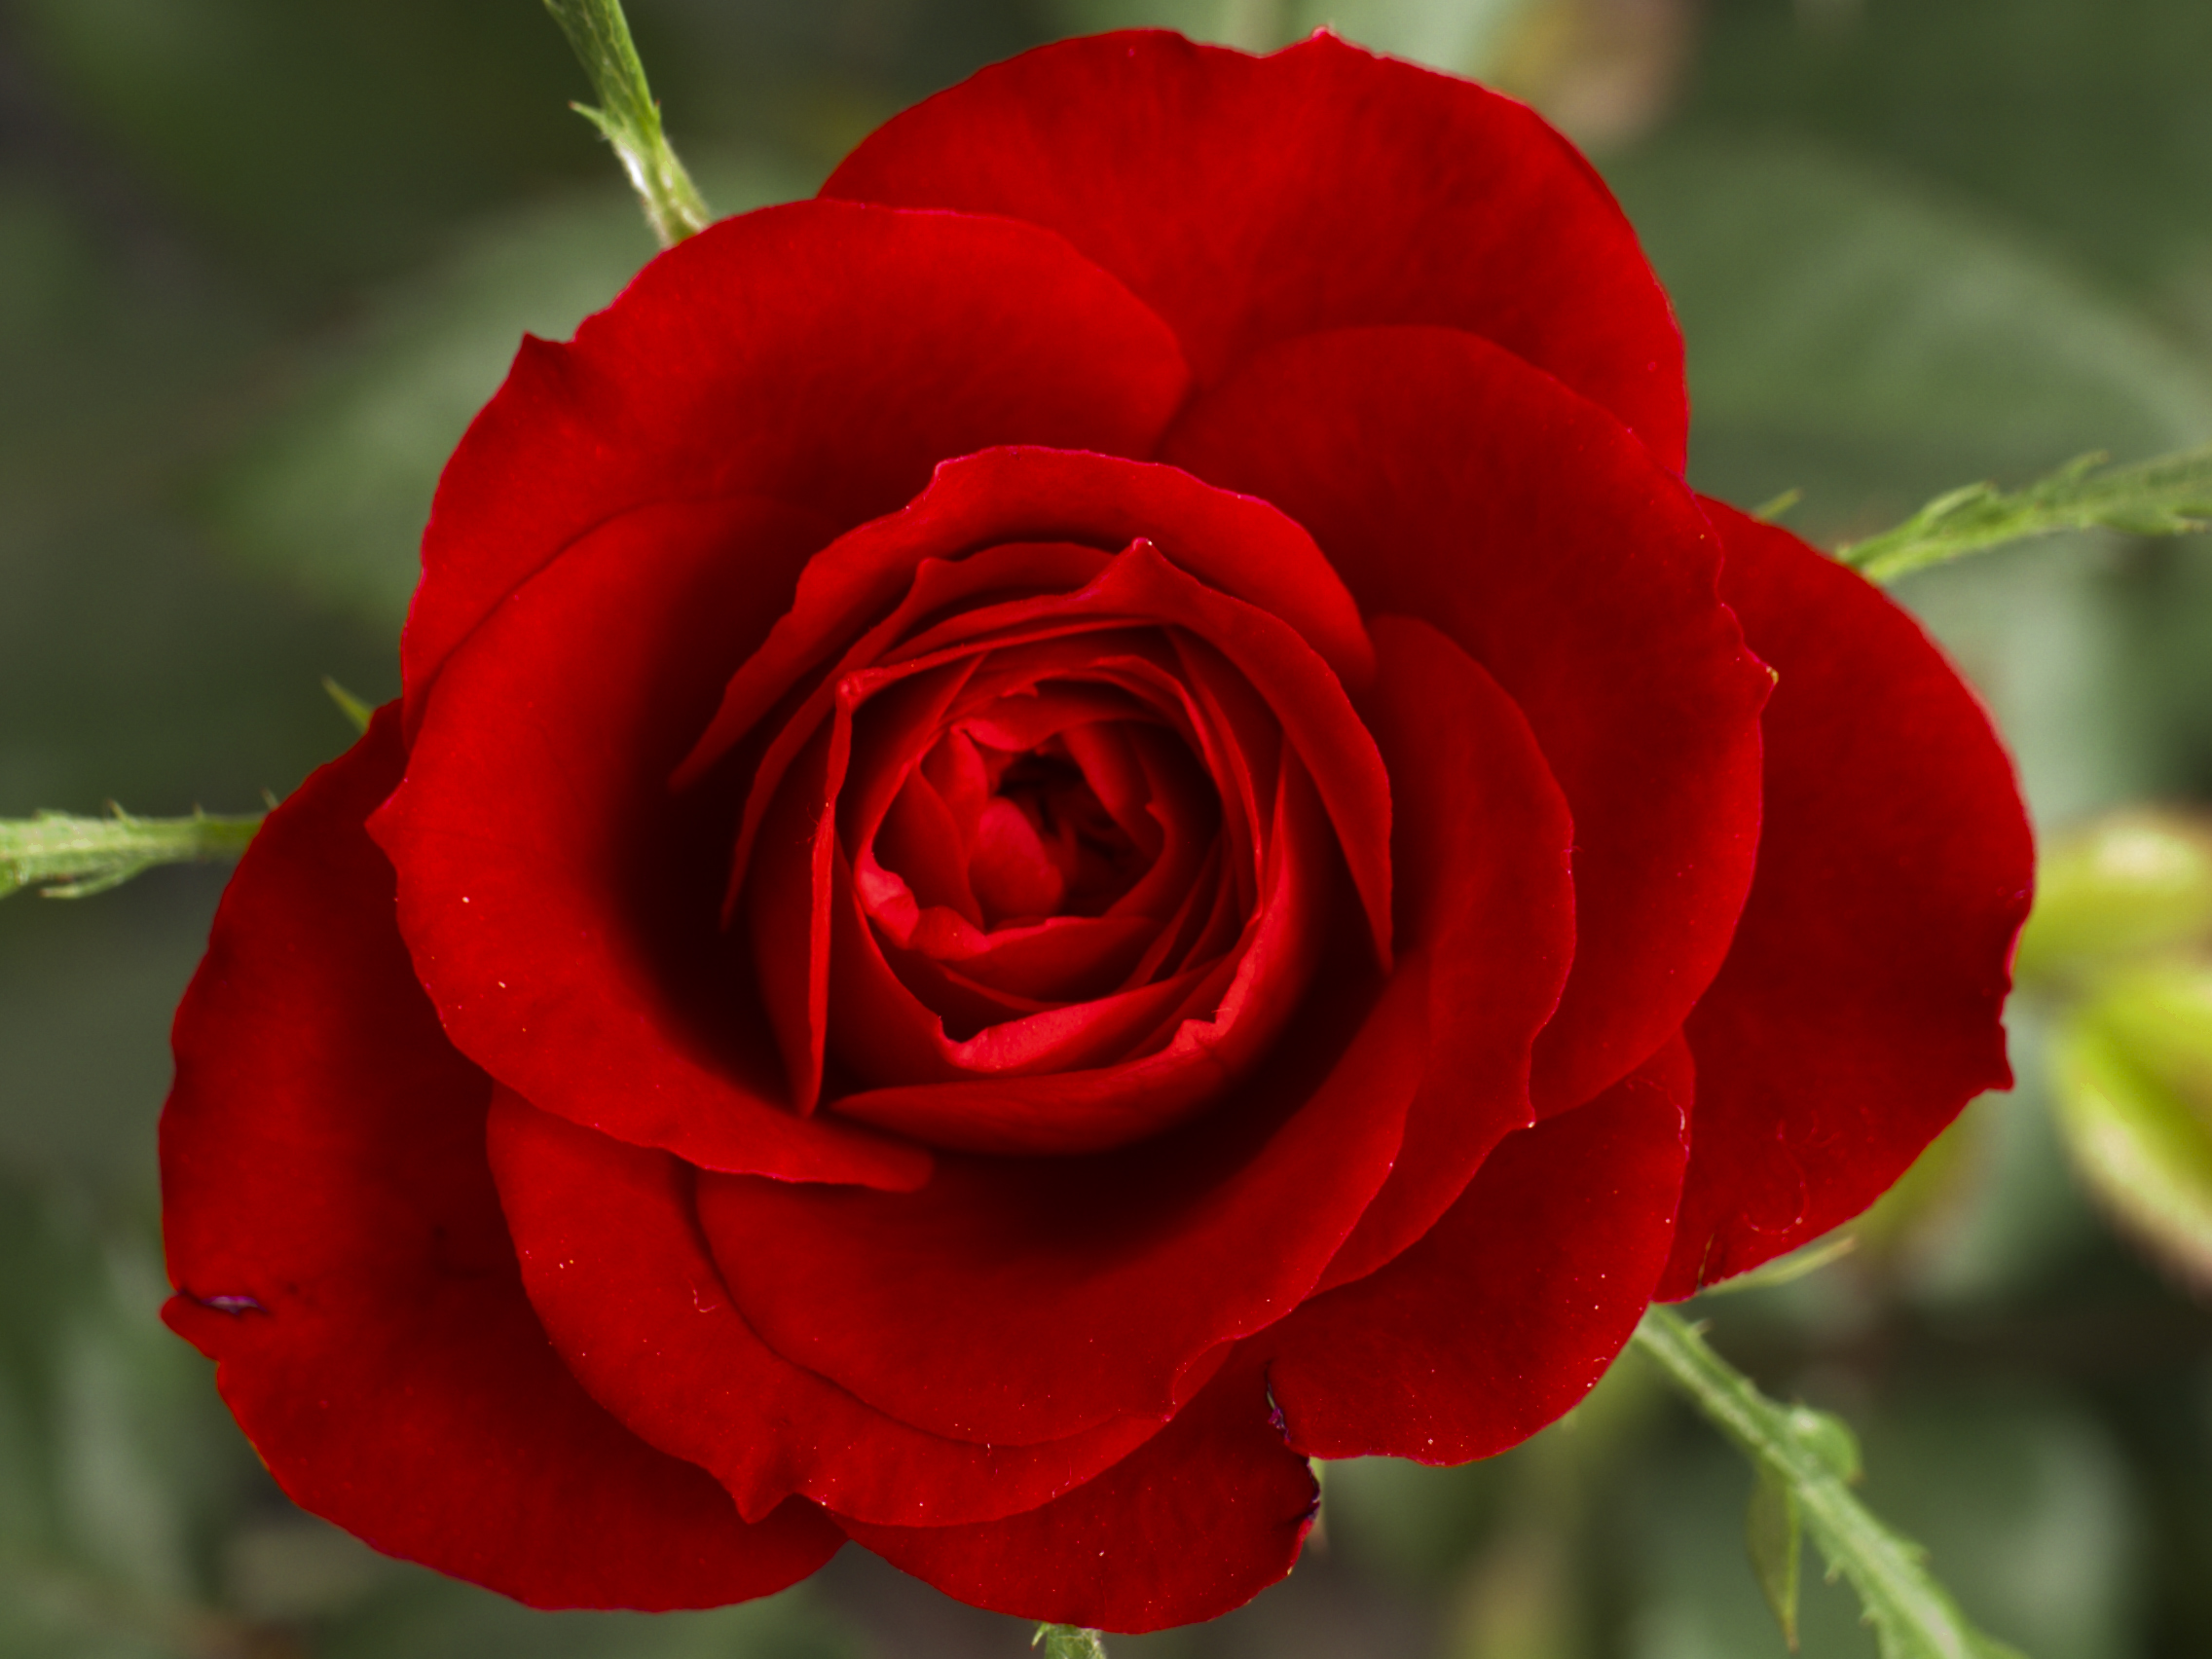 File:Small Red Rose.JPG - Wikimedia Commons